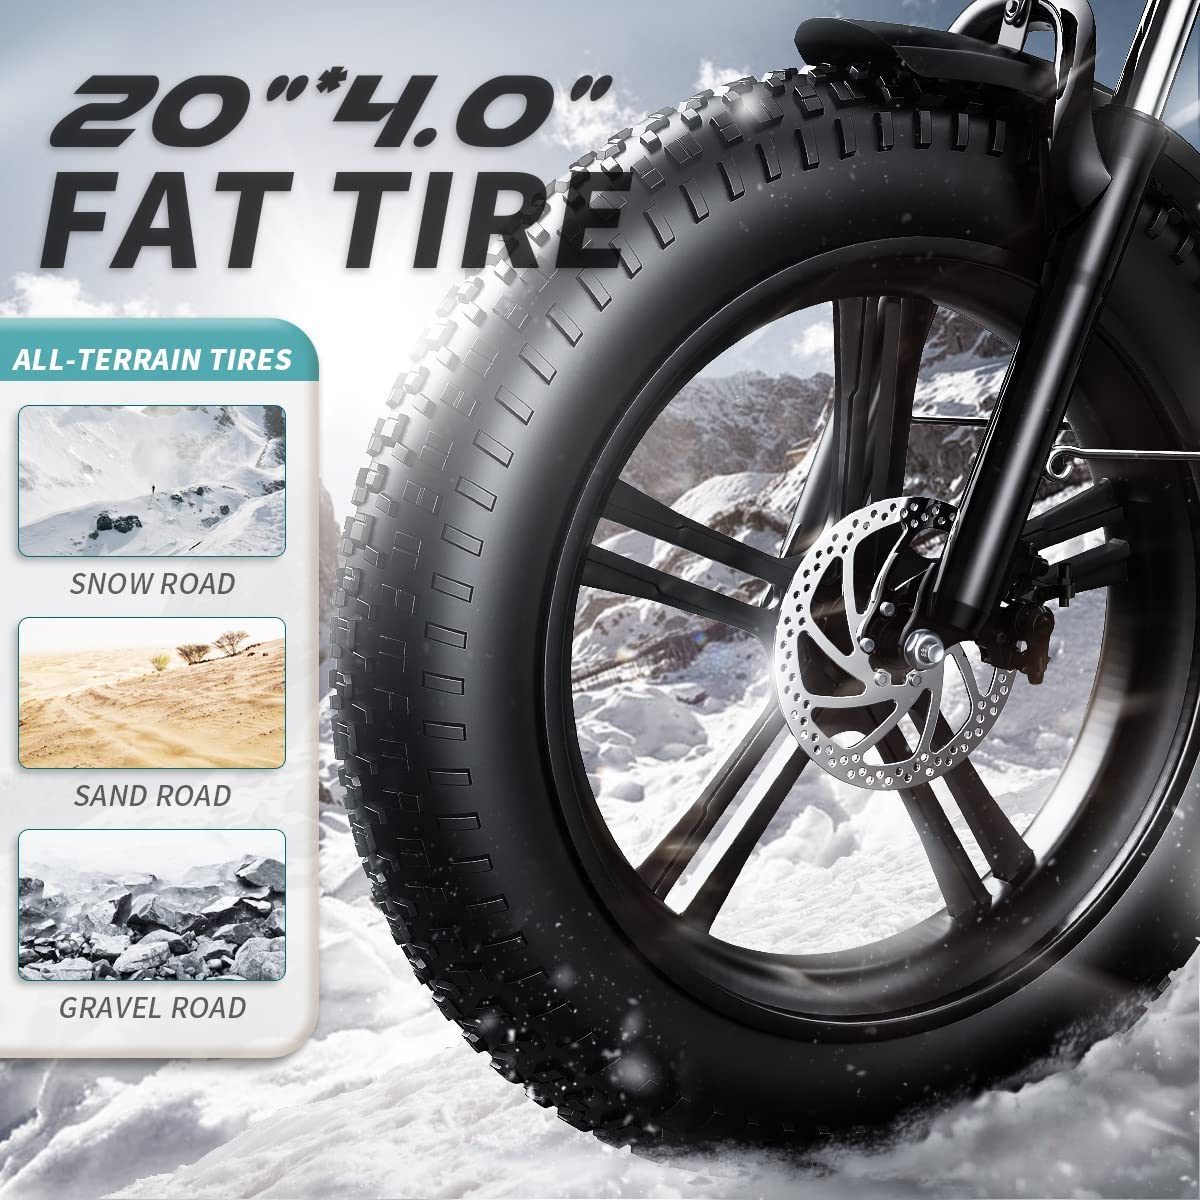 20" x 4.0" All Terrain Fat Tire Electric bike with Samsung 48V 12.8Ah Lithium Battery, tire size